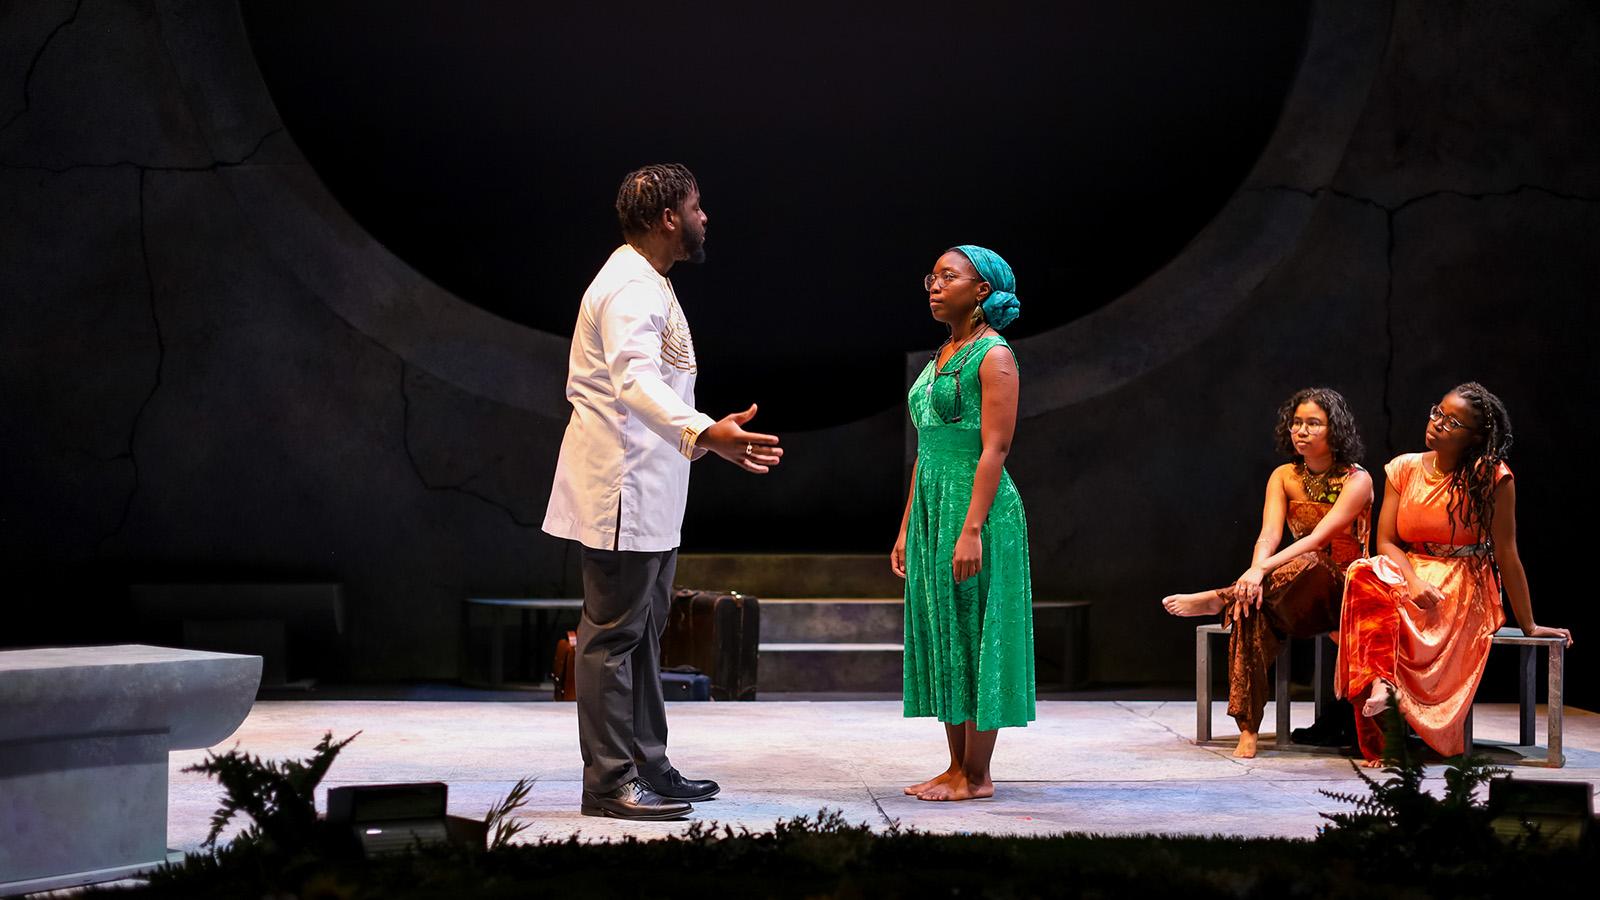 On stage, a man wearing black and white speaks to a woman in a green dress. Two women look on, wearing bronze and orange dresses.